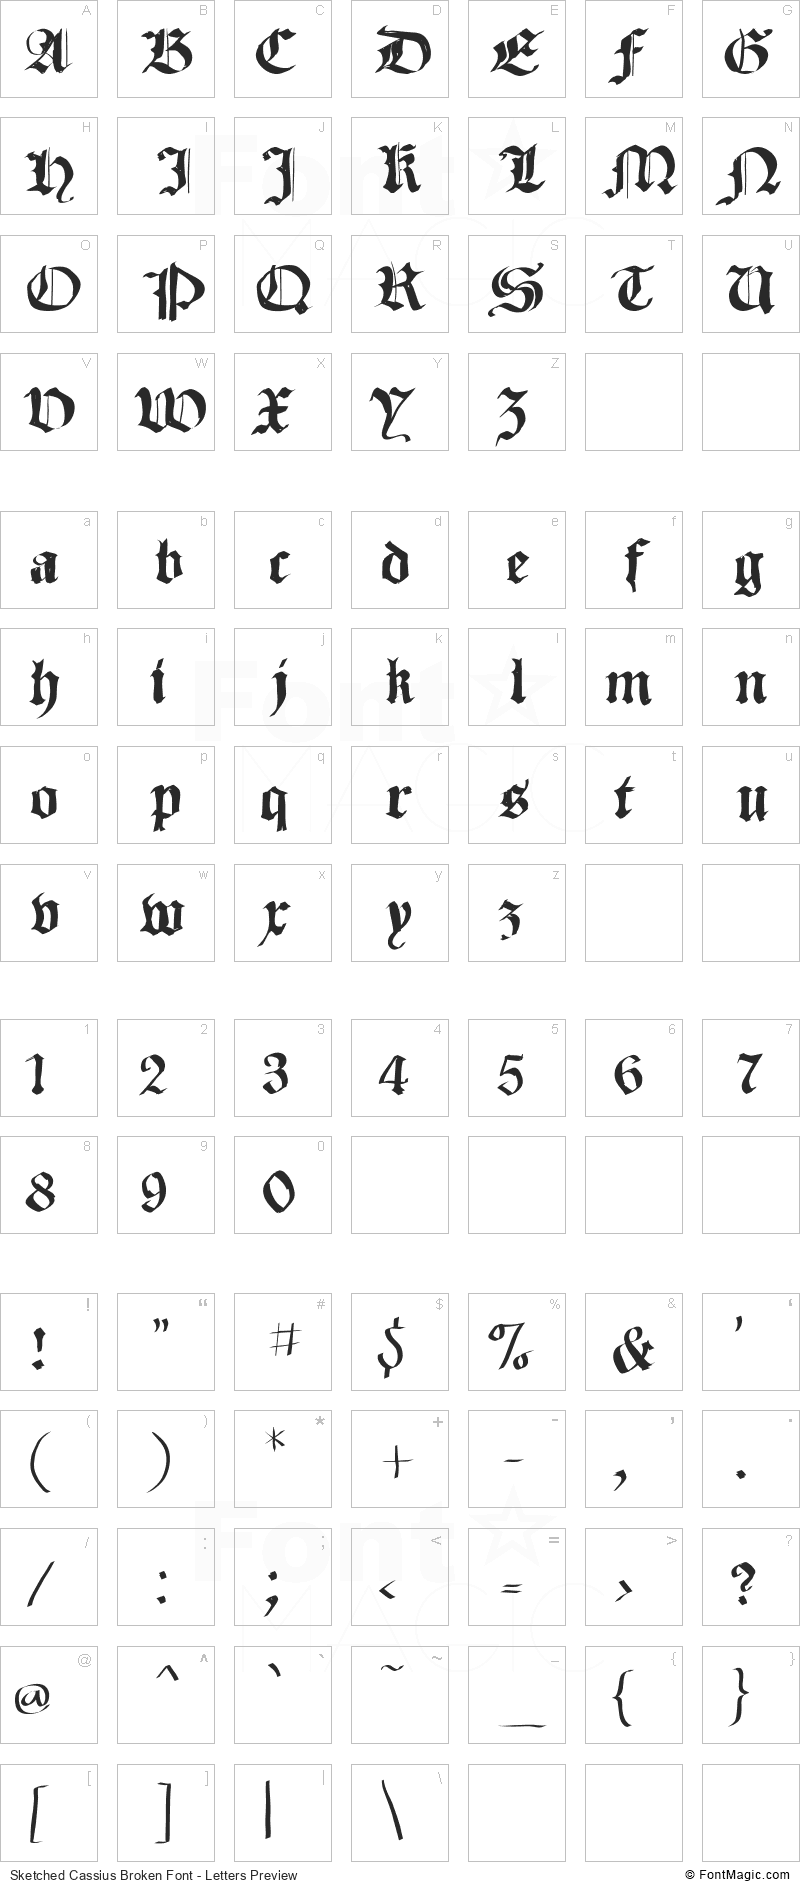 Sketched Cassius Broken Font - All Latters Preview Chart